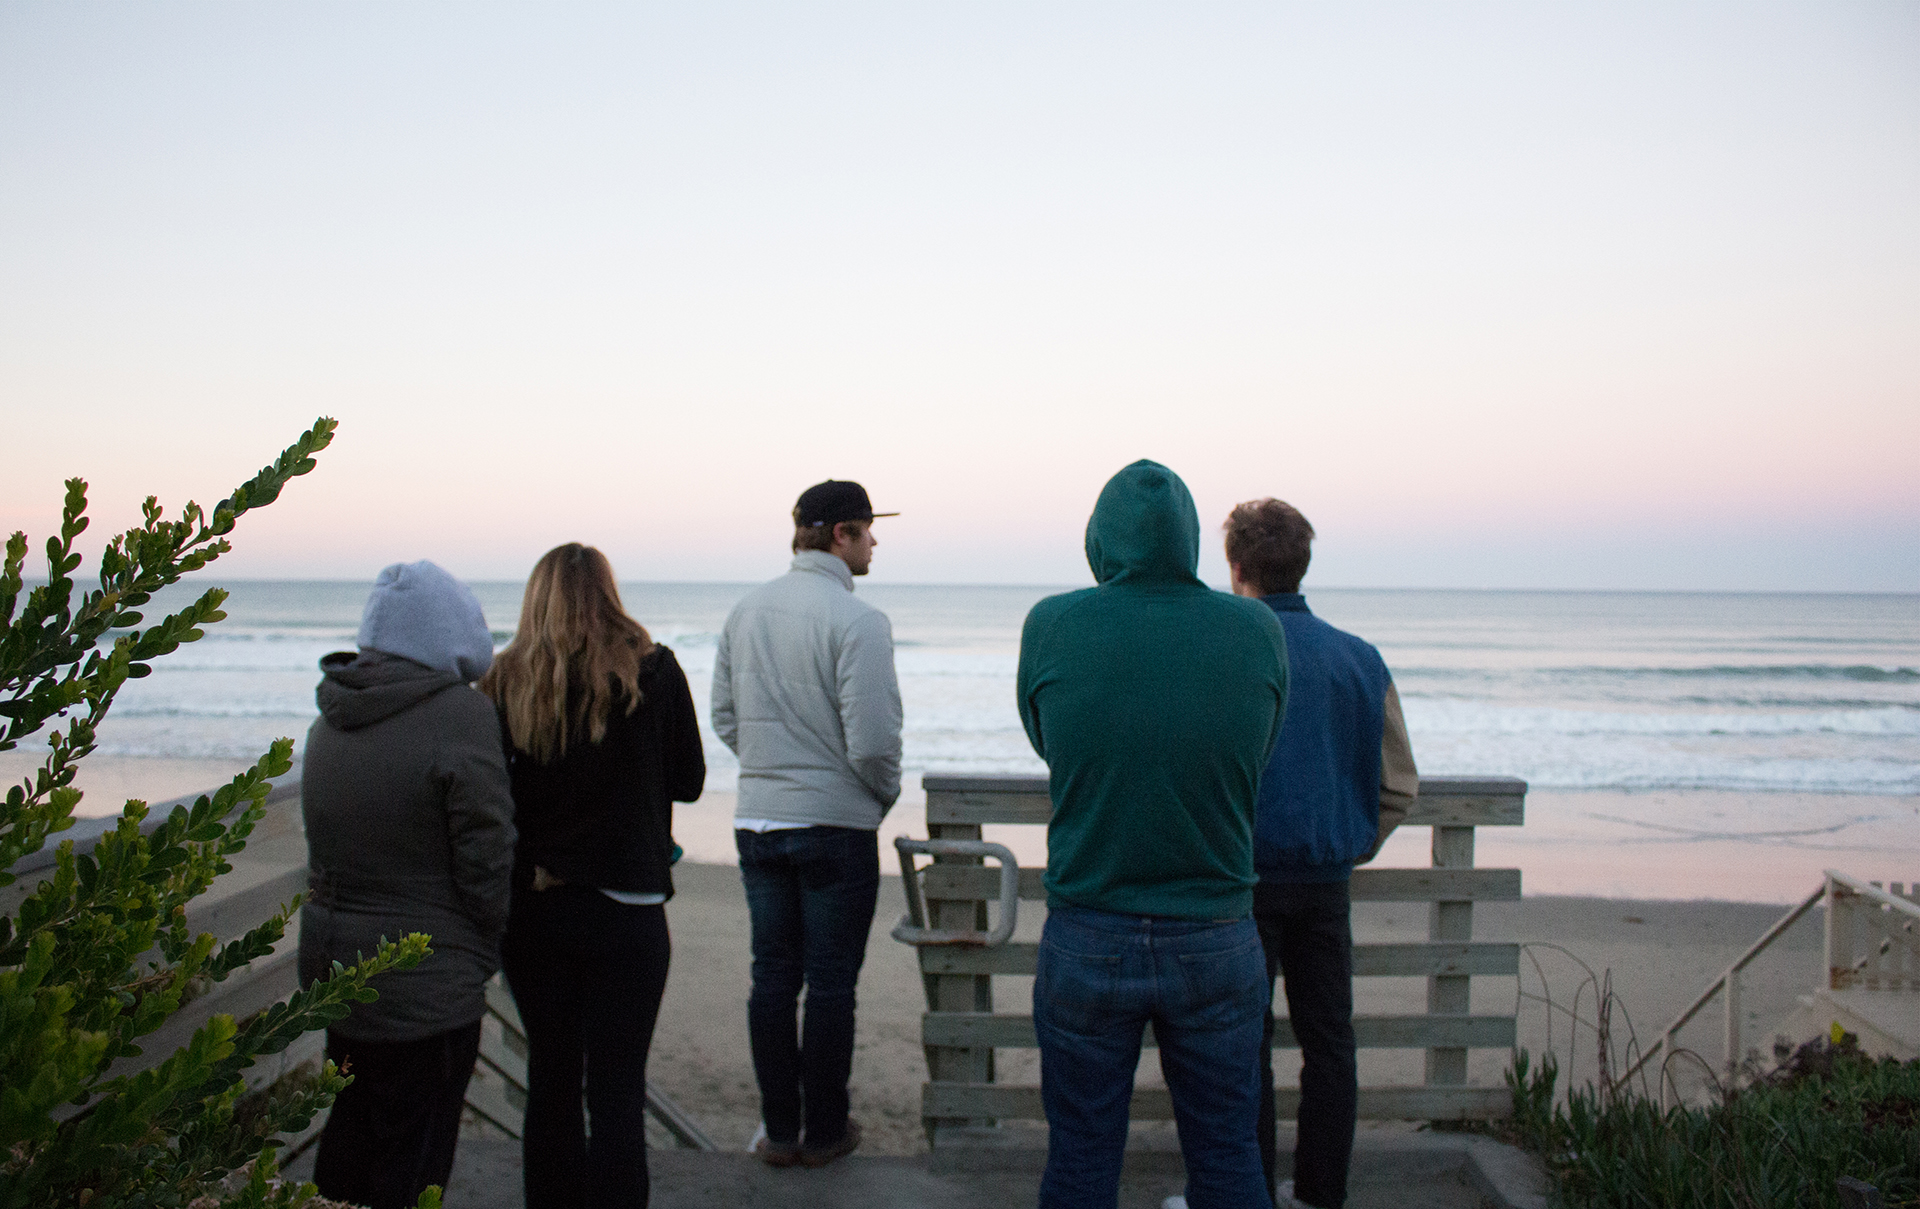 <strong>Gazing out</strong> – Five members of the Cal Poly surf team check out the surf at 7 a.m. Wednesday morning of week three of Cal Poly's winter quarter. Despite having class that day until 8 p.m., Mathiesen (middle) came out with the team. “[I’m] passionate about surfing and want to be able to do it for the rest of my life. [Surfing] is one of the reasons I came to Cal Poly. I have the opportunity now to make use of the education and might as well get stoked to surf good waves,” he said.